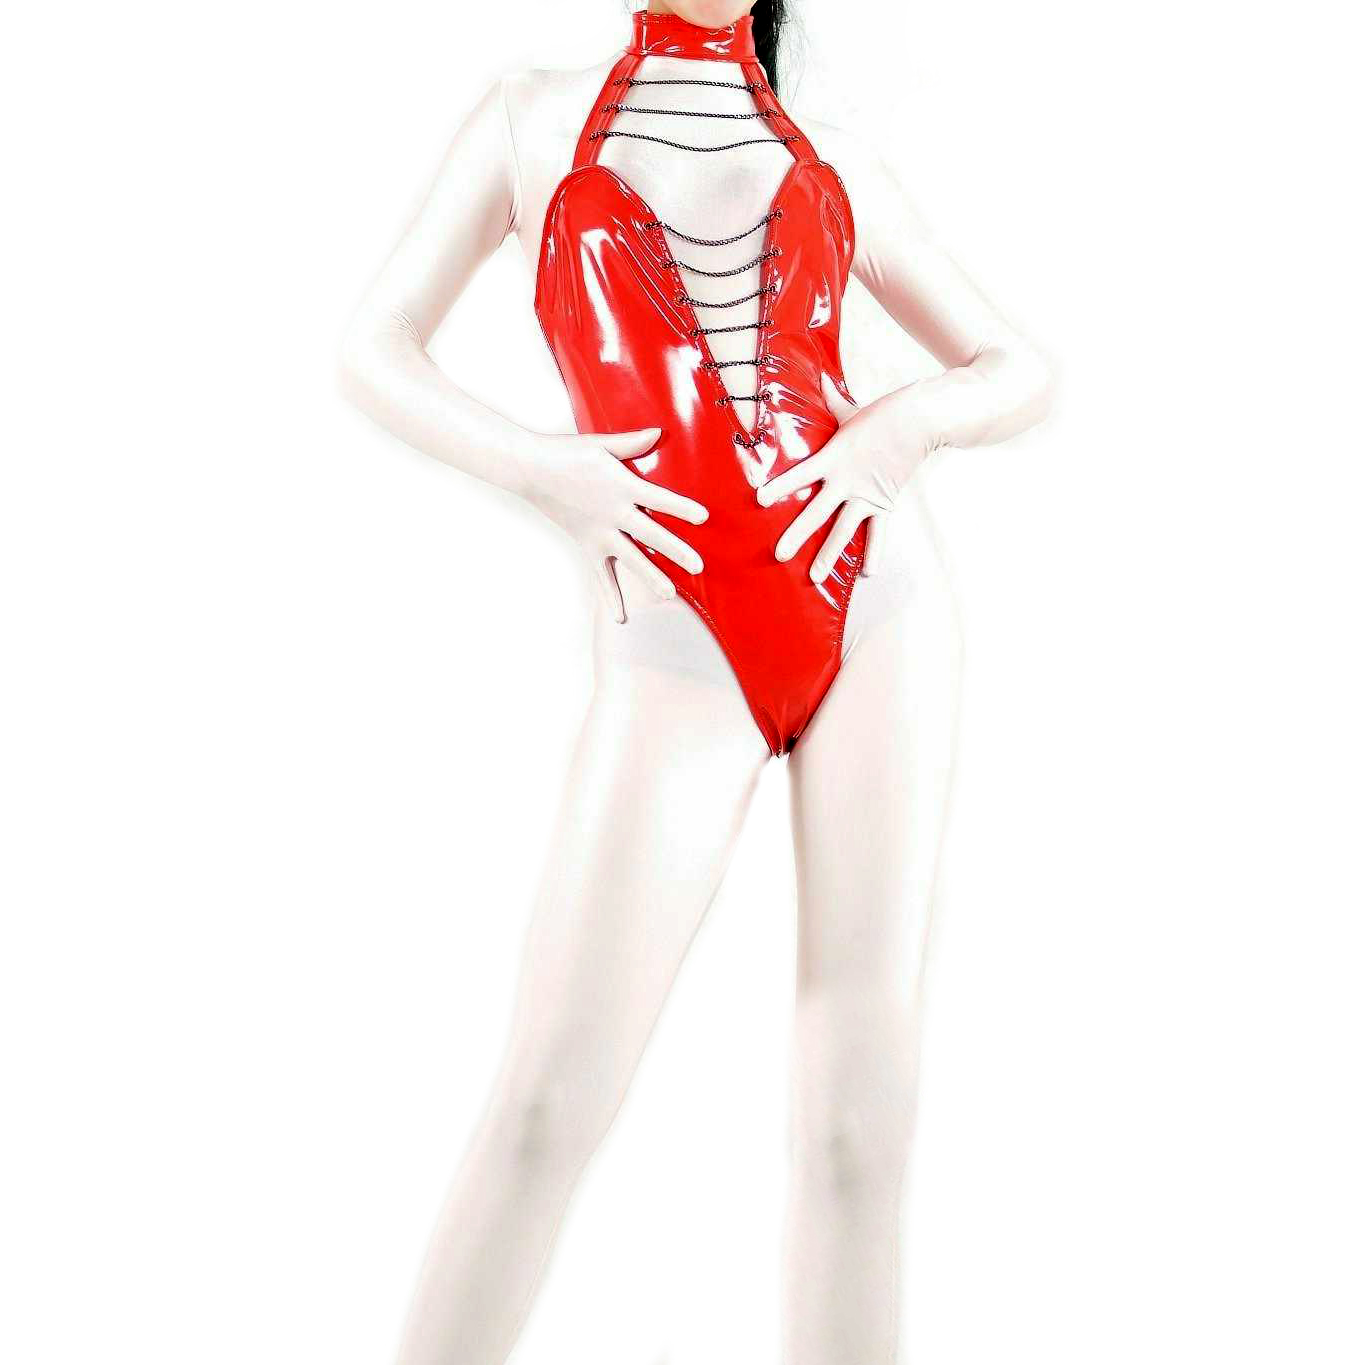 Women's Sexy Jumpsuit-like Red PVC Halter Leotard Catsuit with C